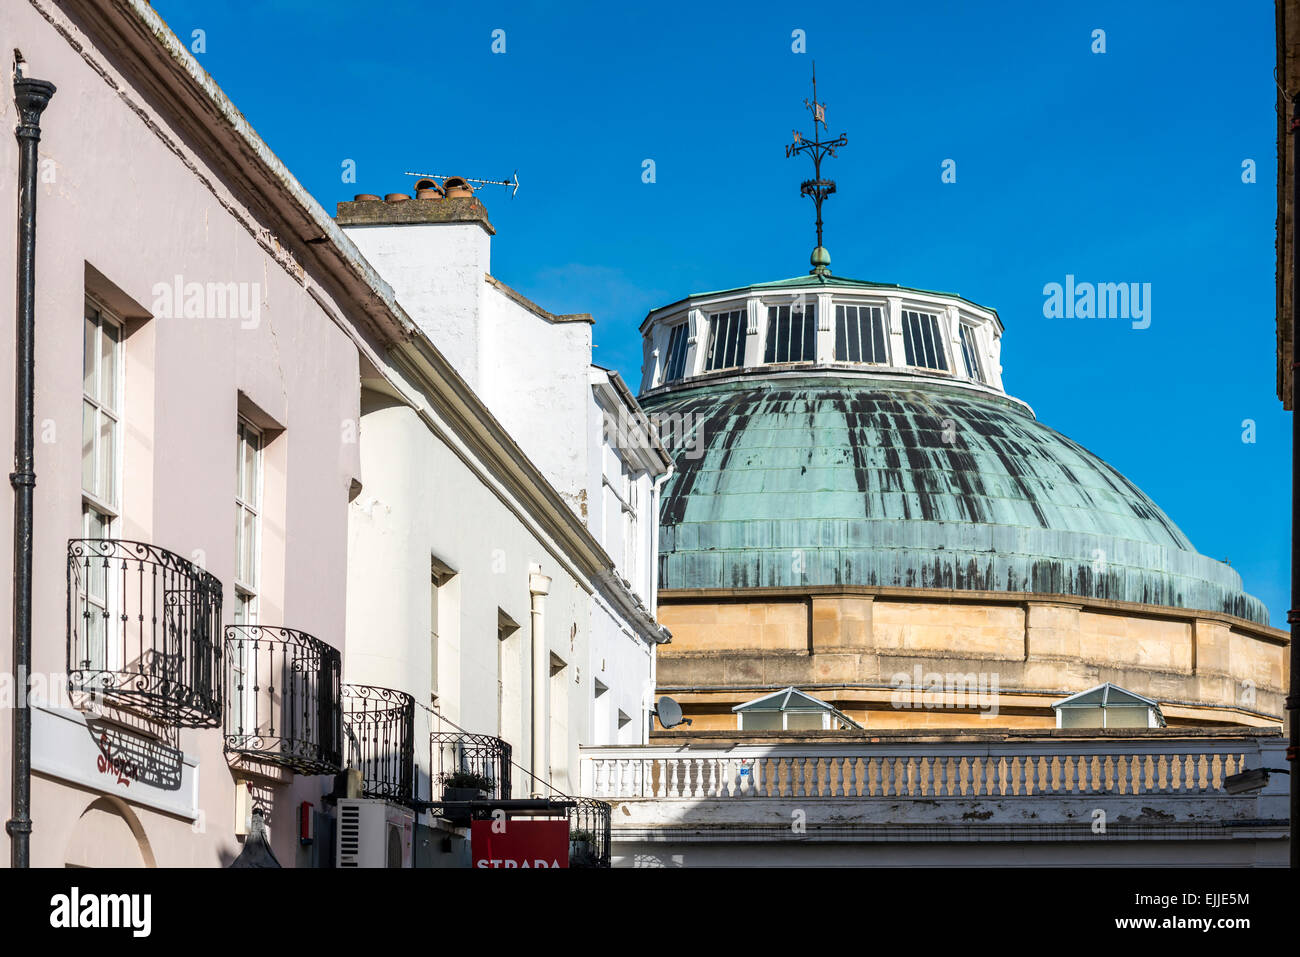 Montpellier Rotunda is a Grade I listed building in Montpellier, Cheltenham, England. Formerly a spa it is now a Lloyds Bank Stock Photo